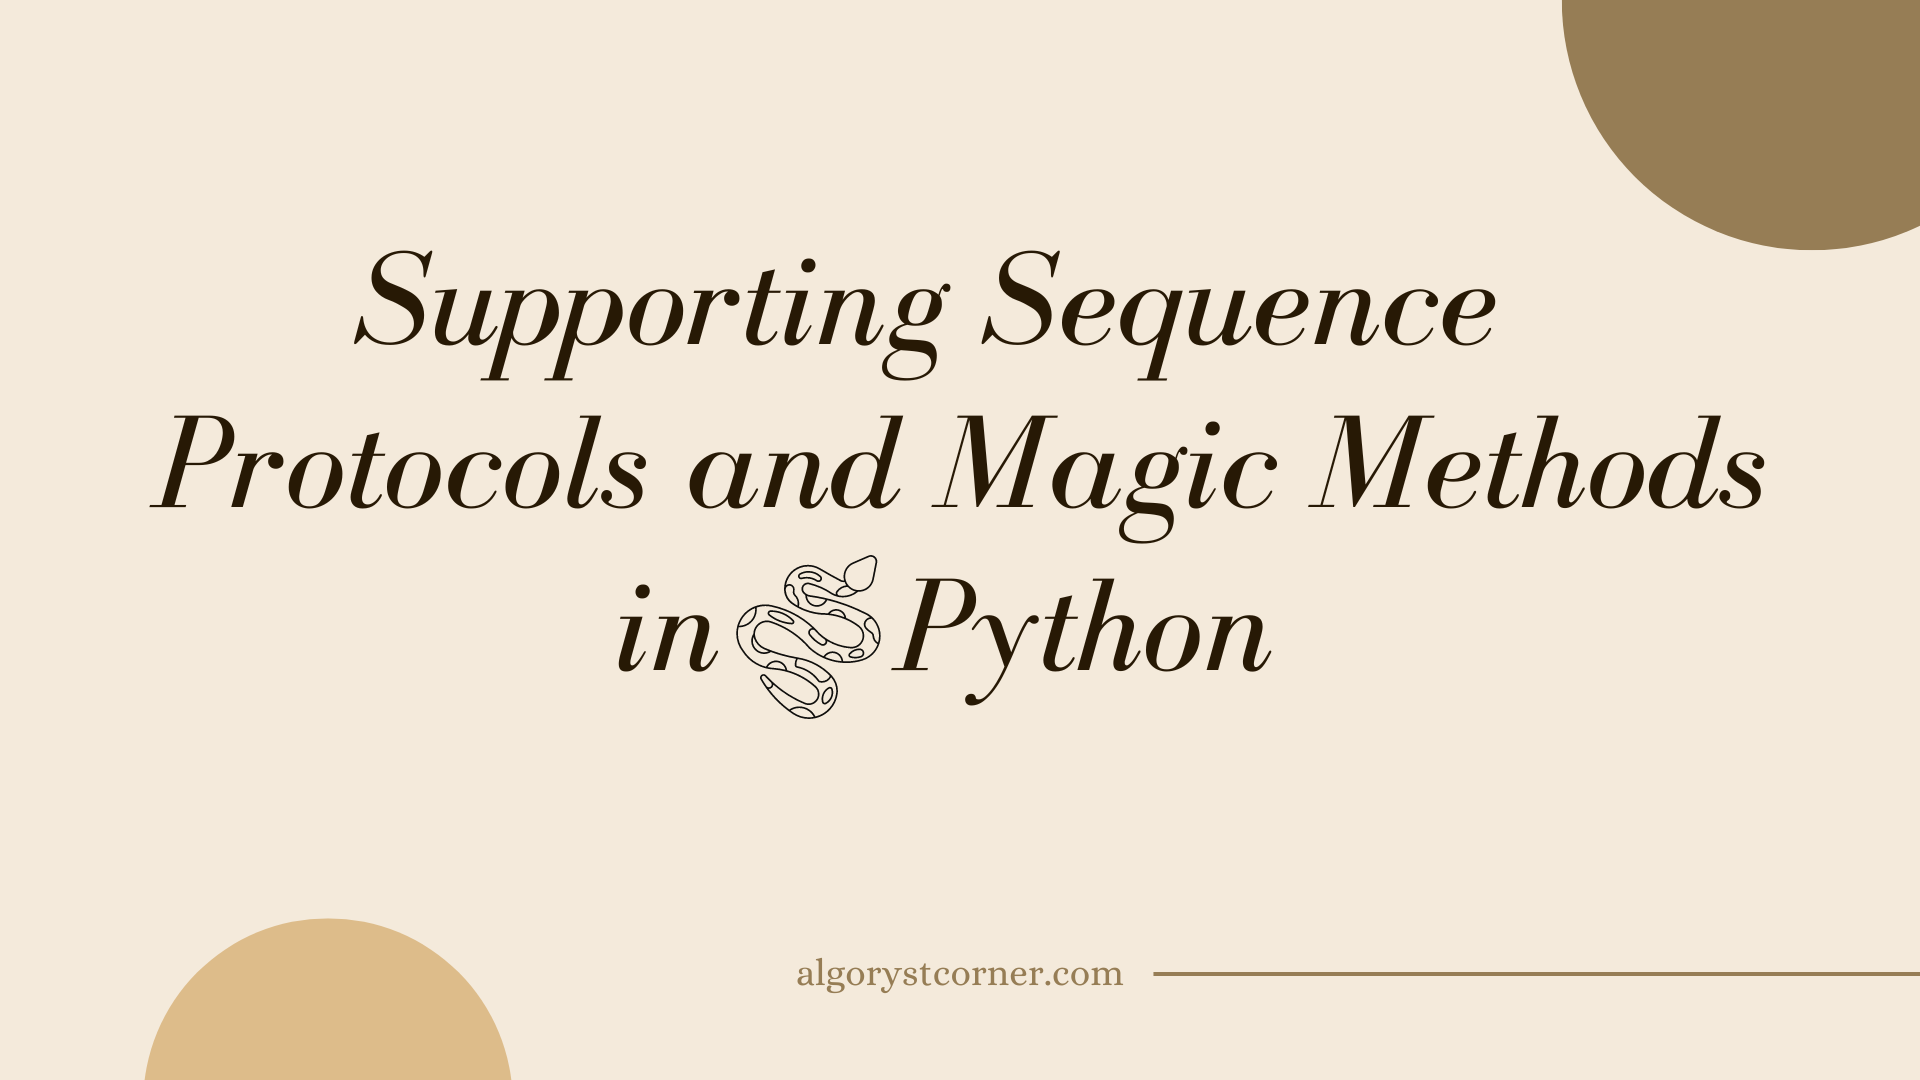 Supporting Different Sequence Protocols and Magic Methods in Python 